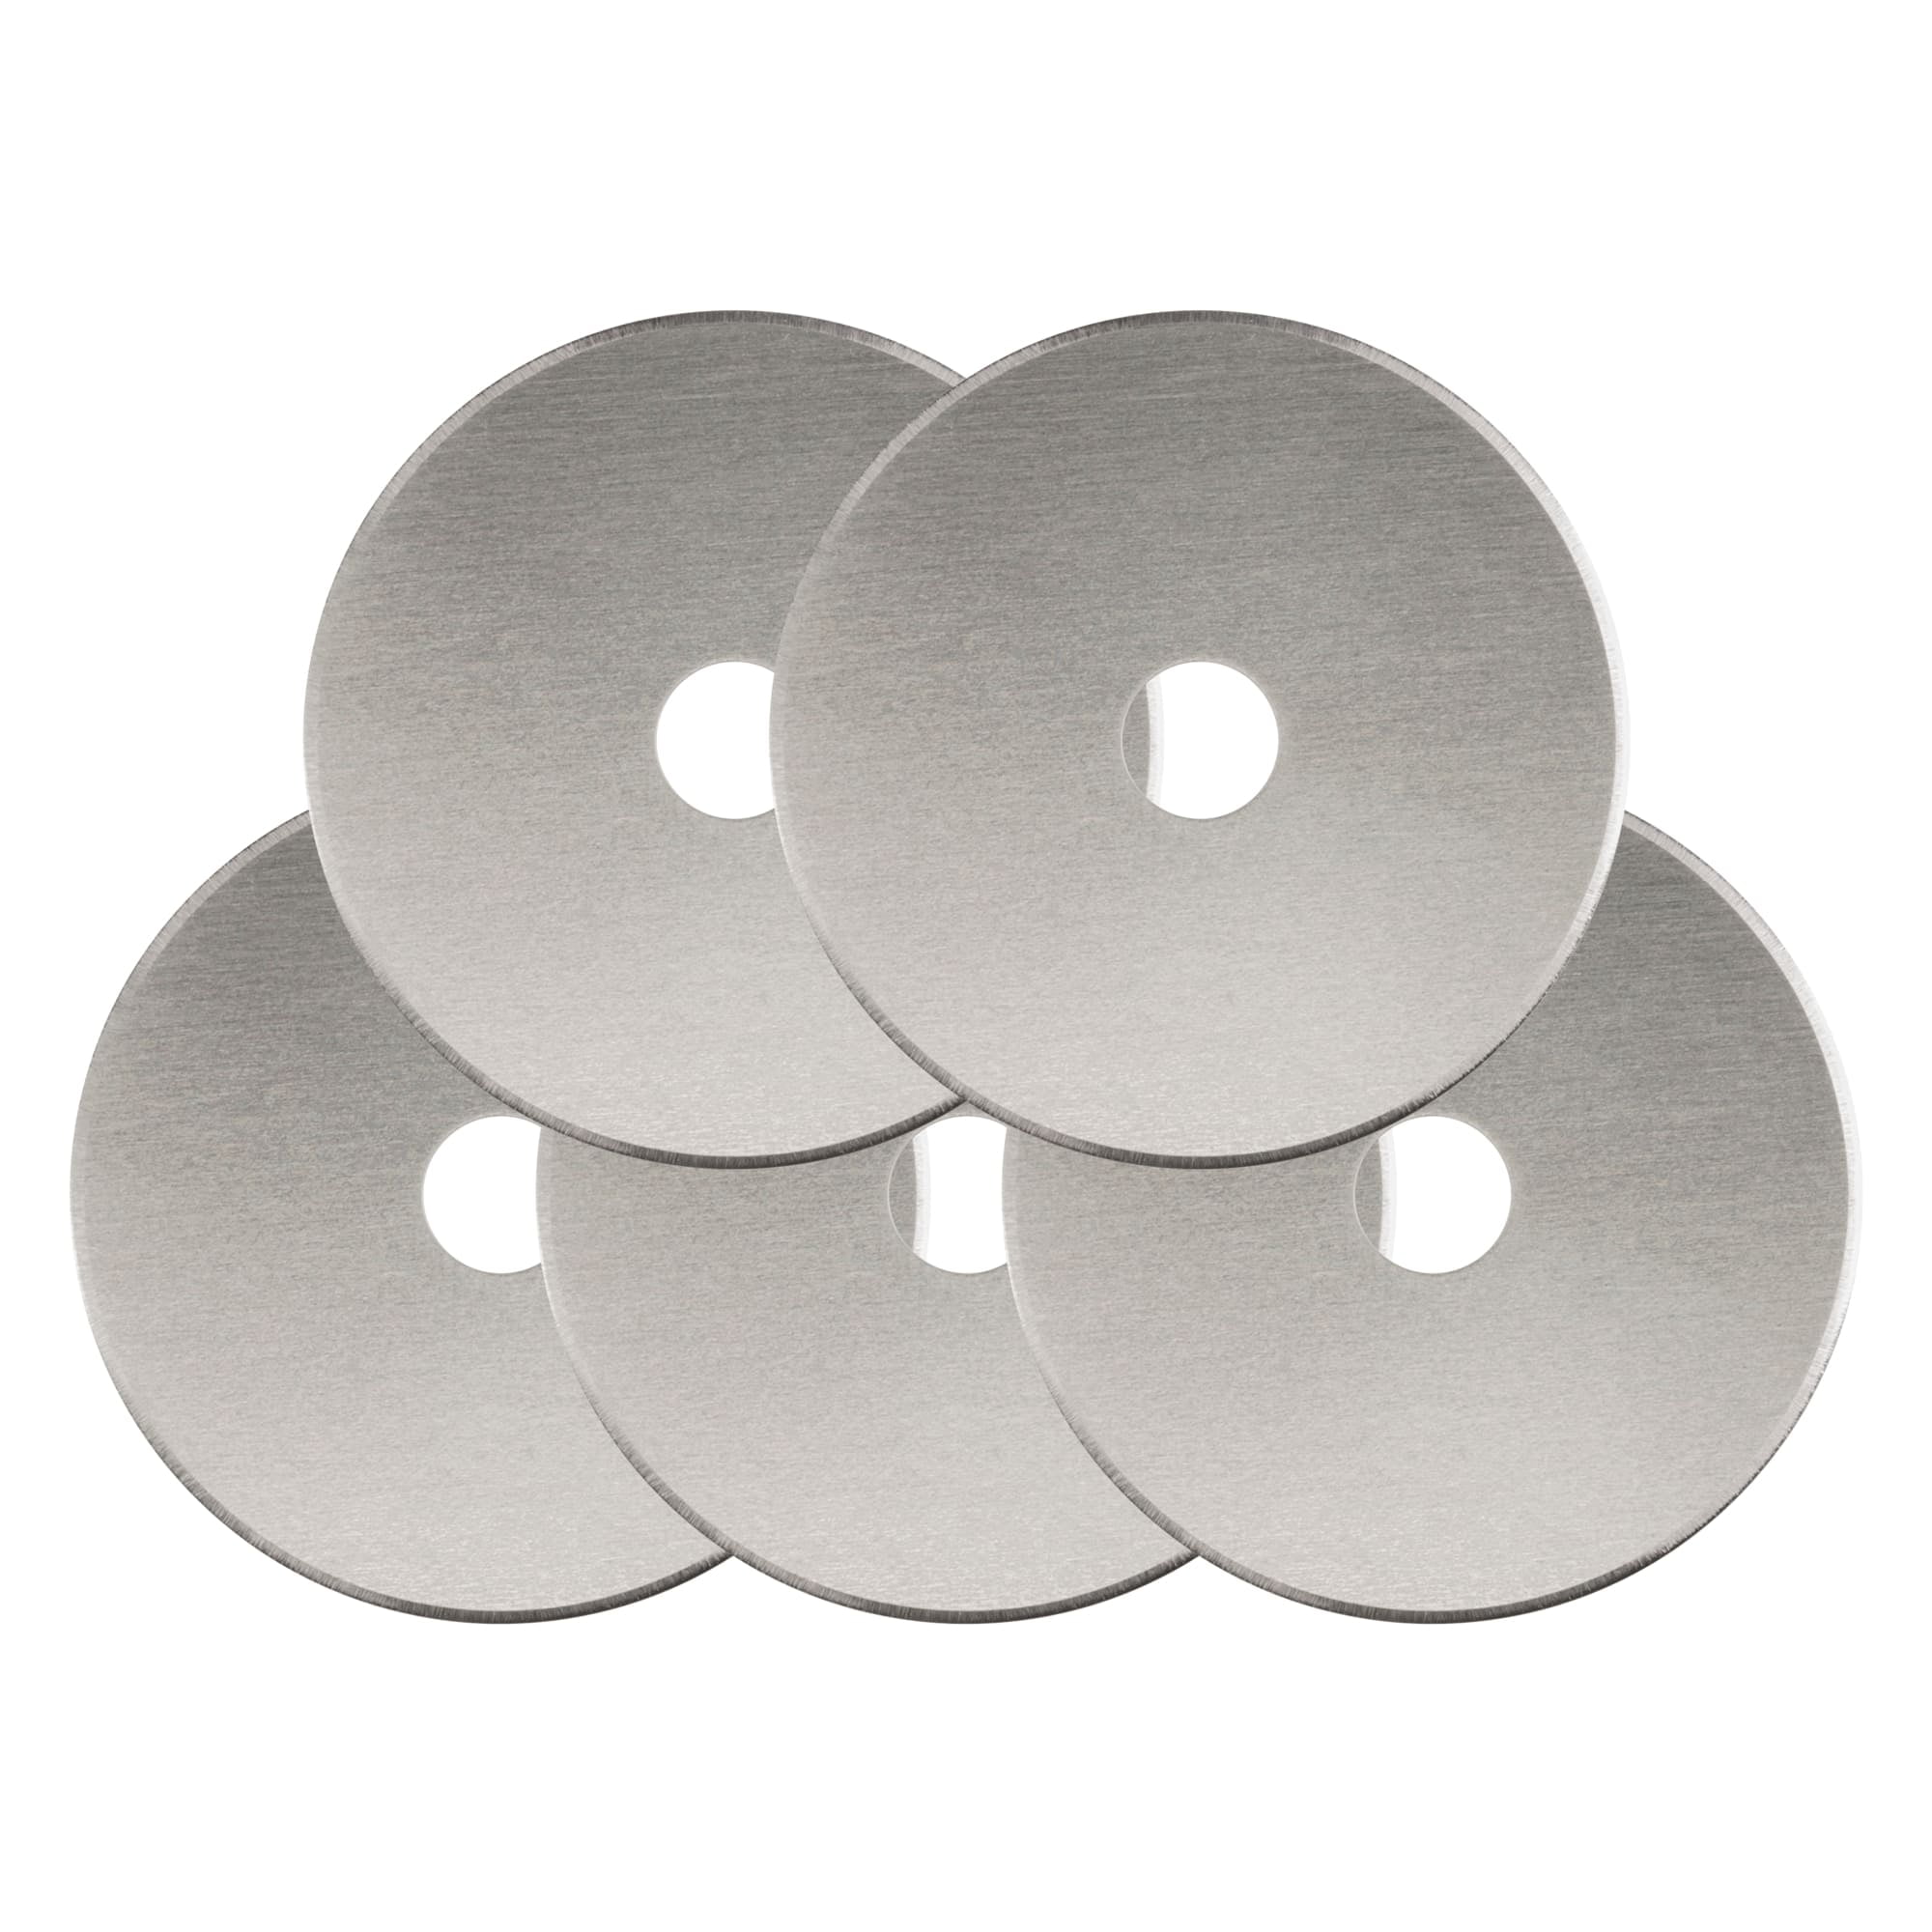 TULA PINK 45mm Rotary Cutter Replacement Blades 5 Pack